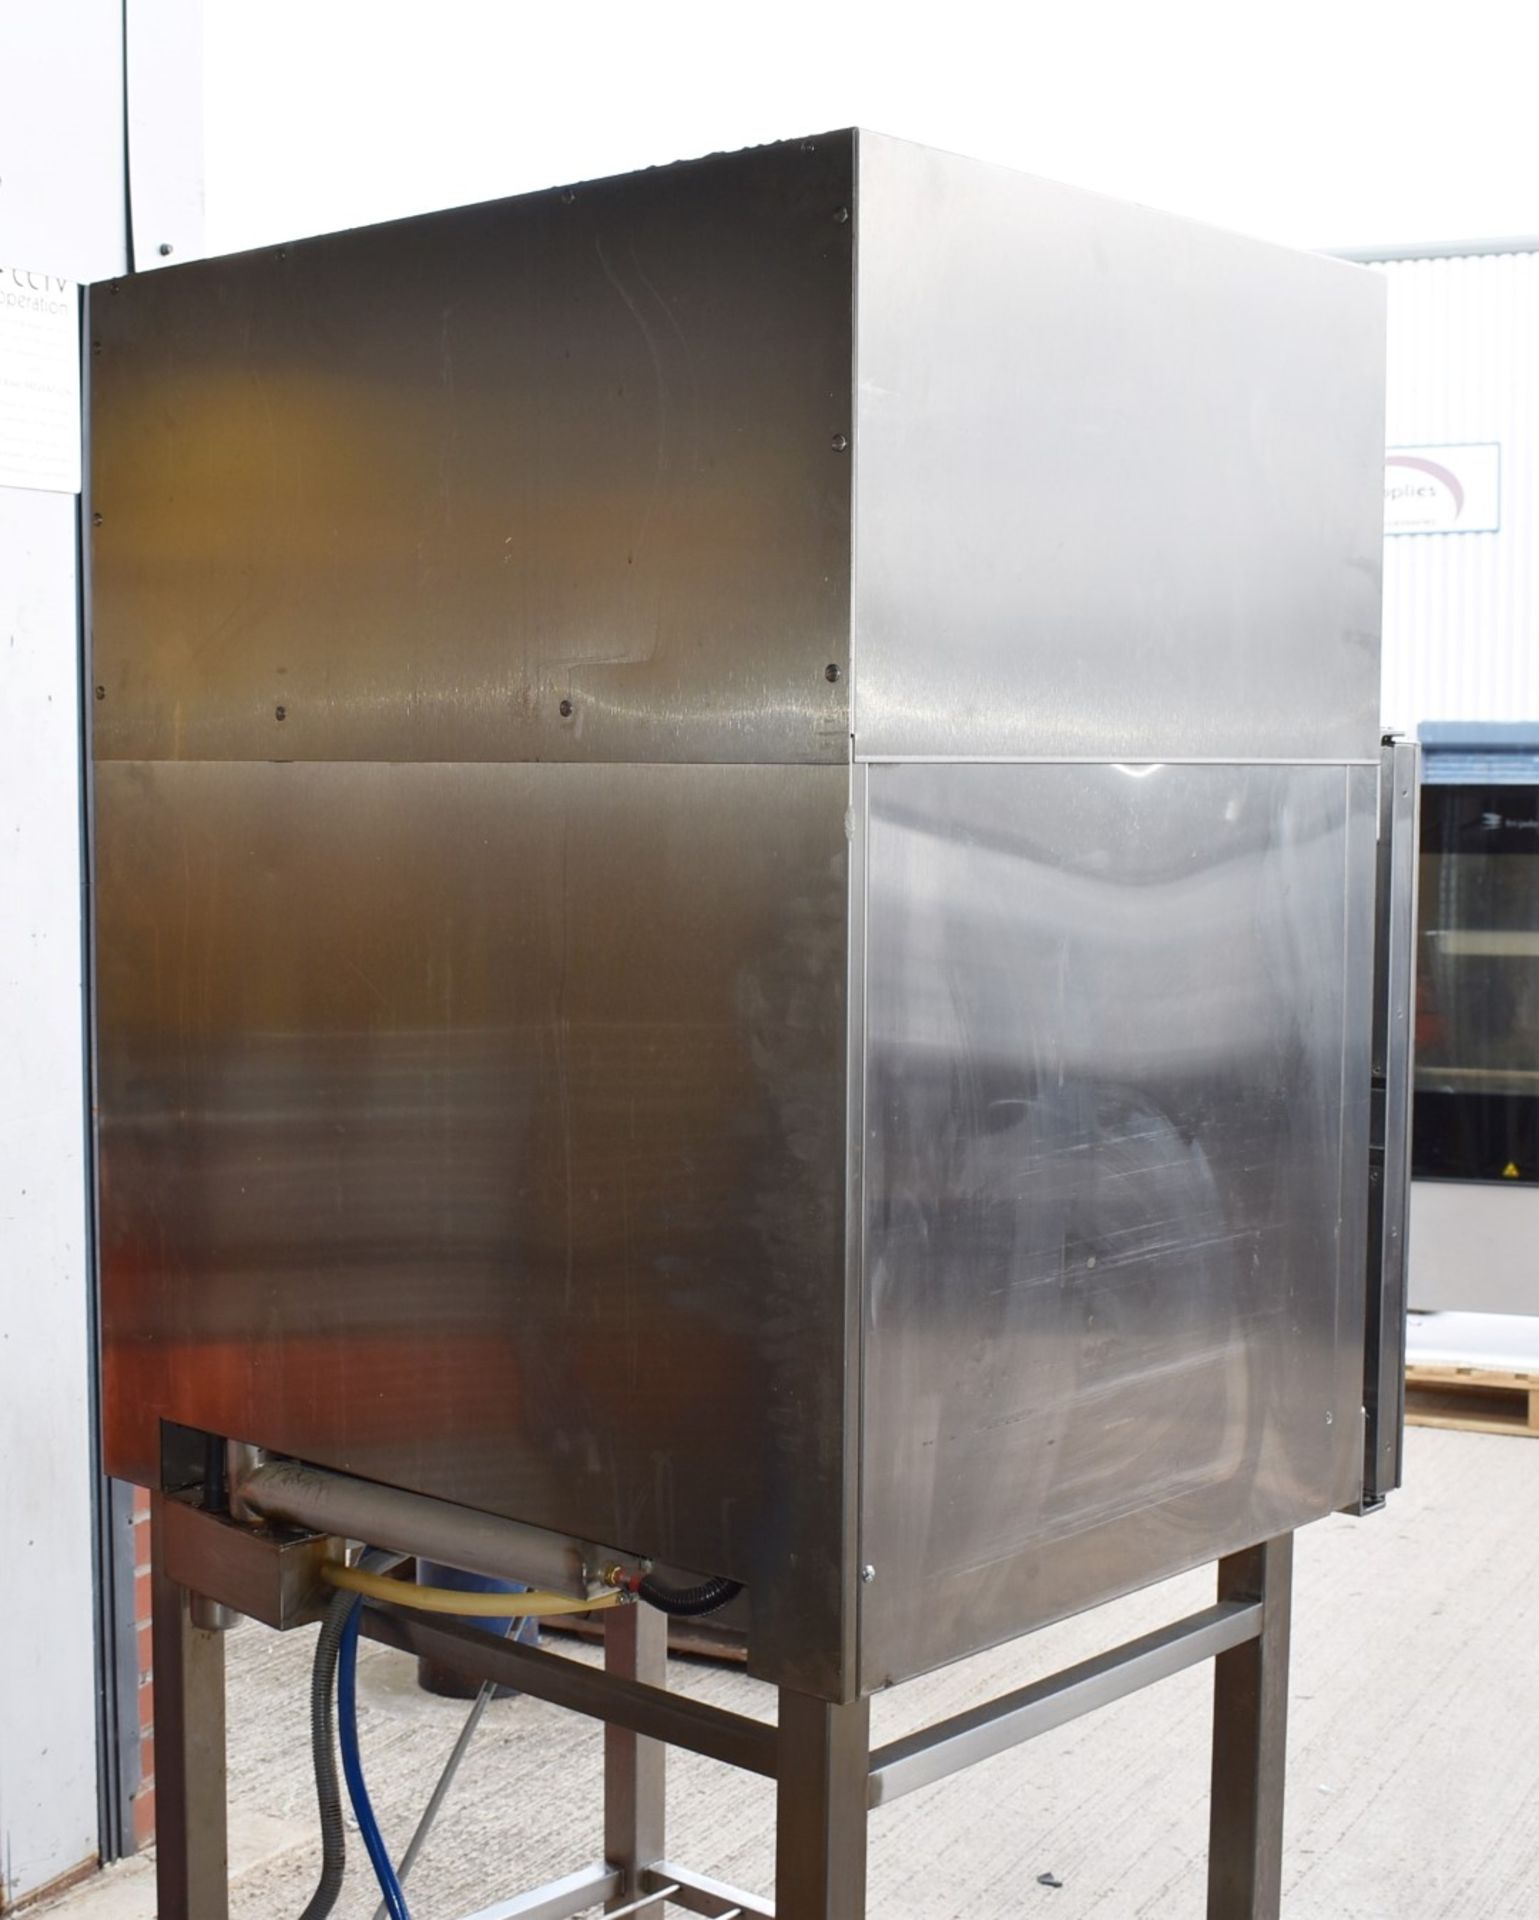 1 x Houno 6 Grid Electric Combi Oven With Stand and Extractor - 3 Phase Electric Power - Model C1.06 - Image 2 of 13